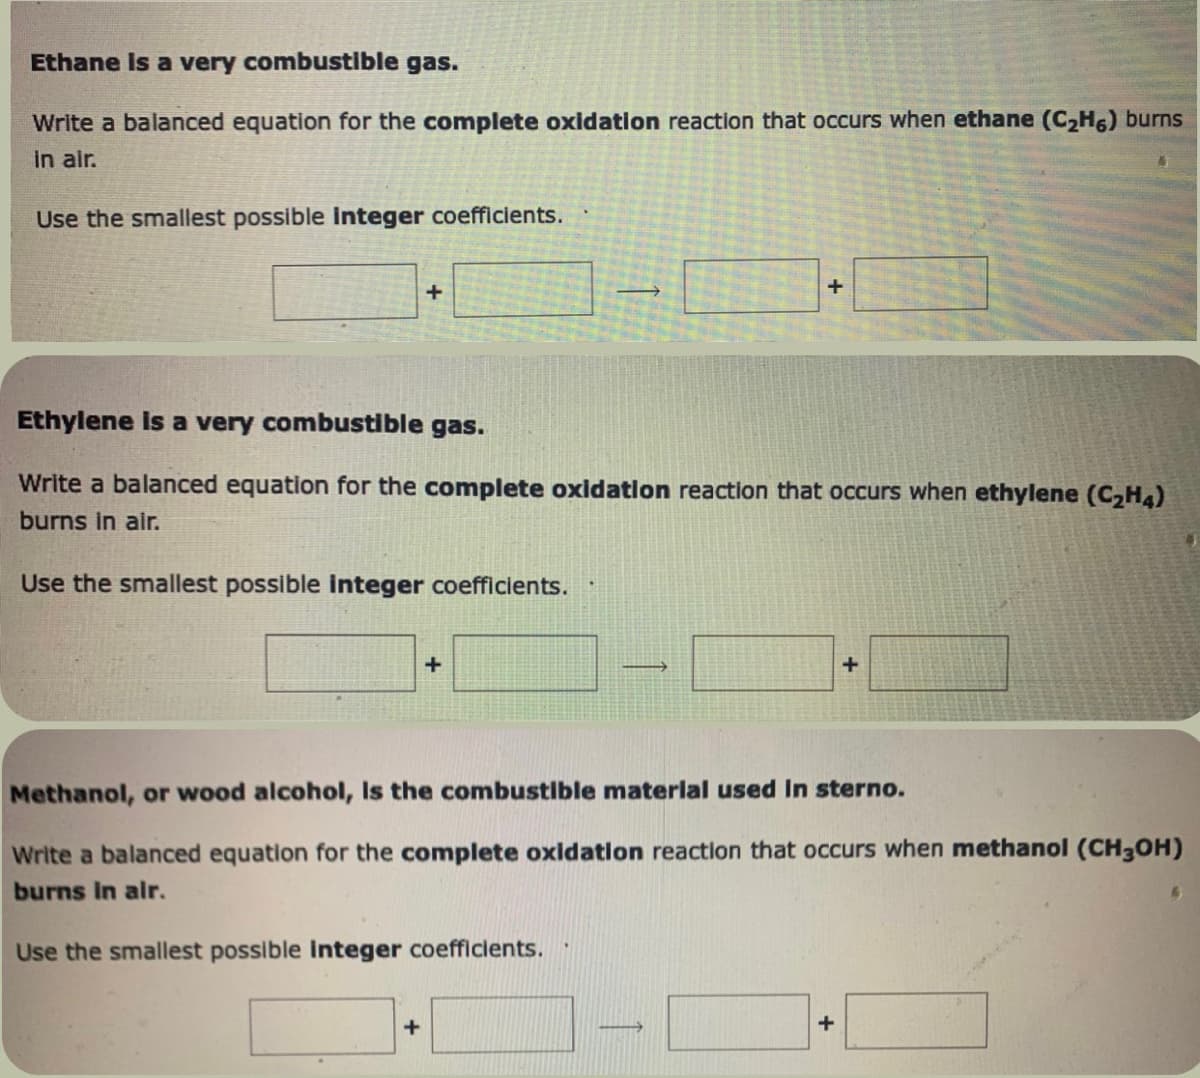 Ethane is a very combustible gas.
Write a balanced equation for the complete oxidation reaction that occurs when ethane (C₂H6) burns
in air.
Use the smallest possible integer coefficients.
+
Ethylene is a very combustible gas.
Write a balanced equation for the complete oxidation reaction that occurs when ethylene (C₂H4)
burns in air.
Use the smallest possible integer coefficients.
+
+
+
→
Methanol, or wood alcohol, Is the combustible material used in sterno.
Write a balanced equation for the complete oxidation reaction that occurs when methanol (CH3OH)
burns in air.
Use the smallest possible integer coefficients.
+
+
6